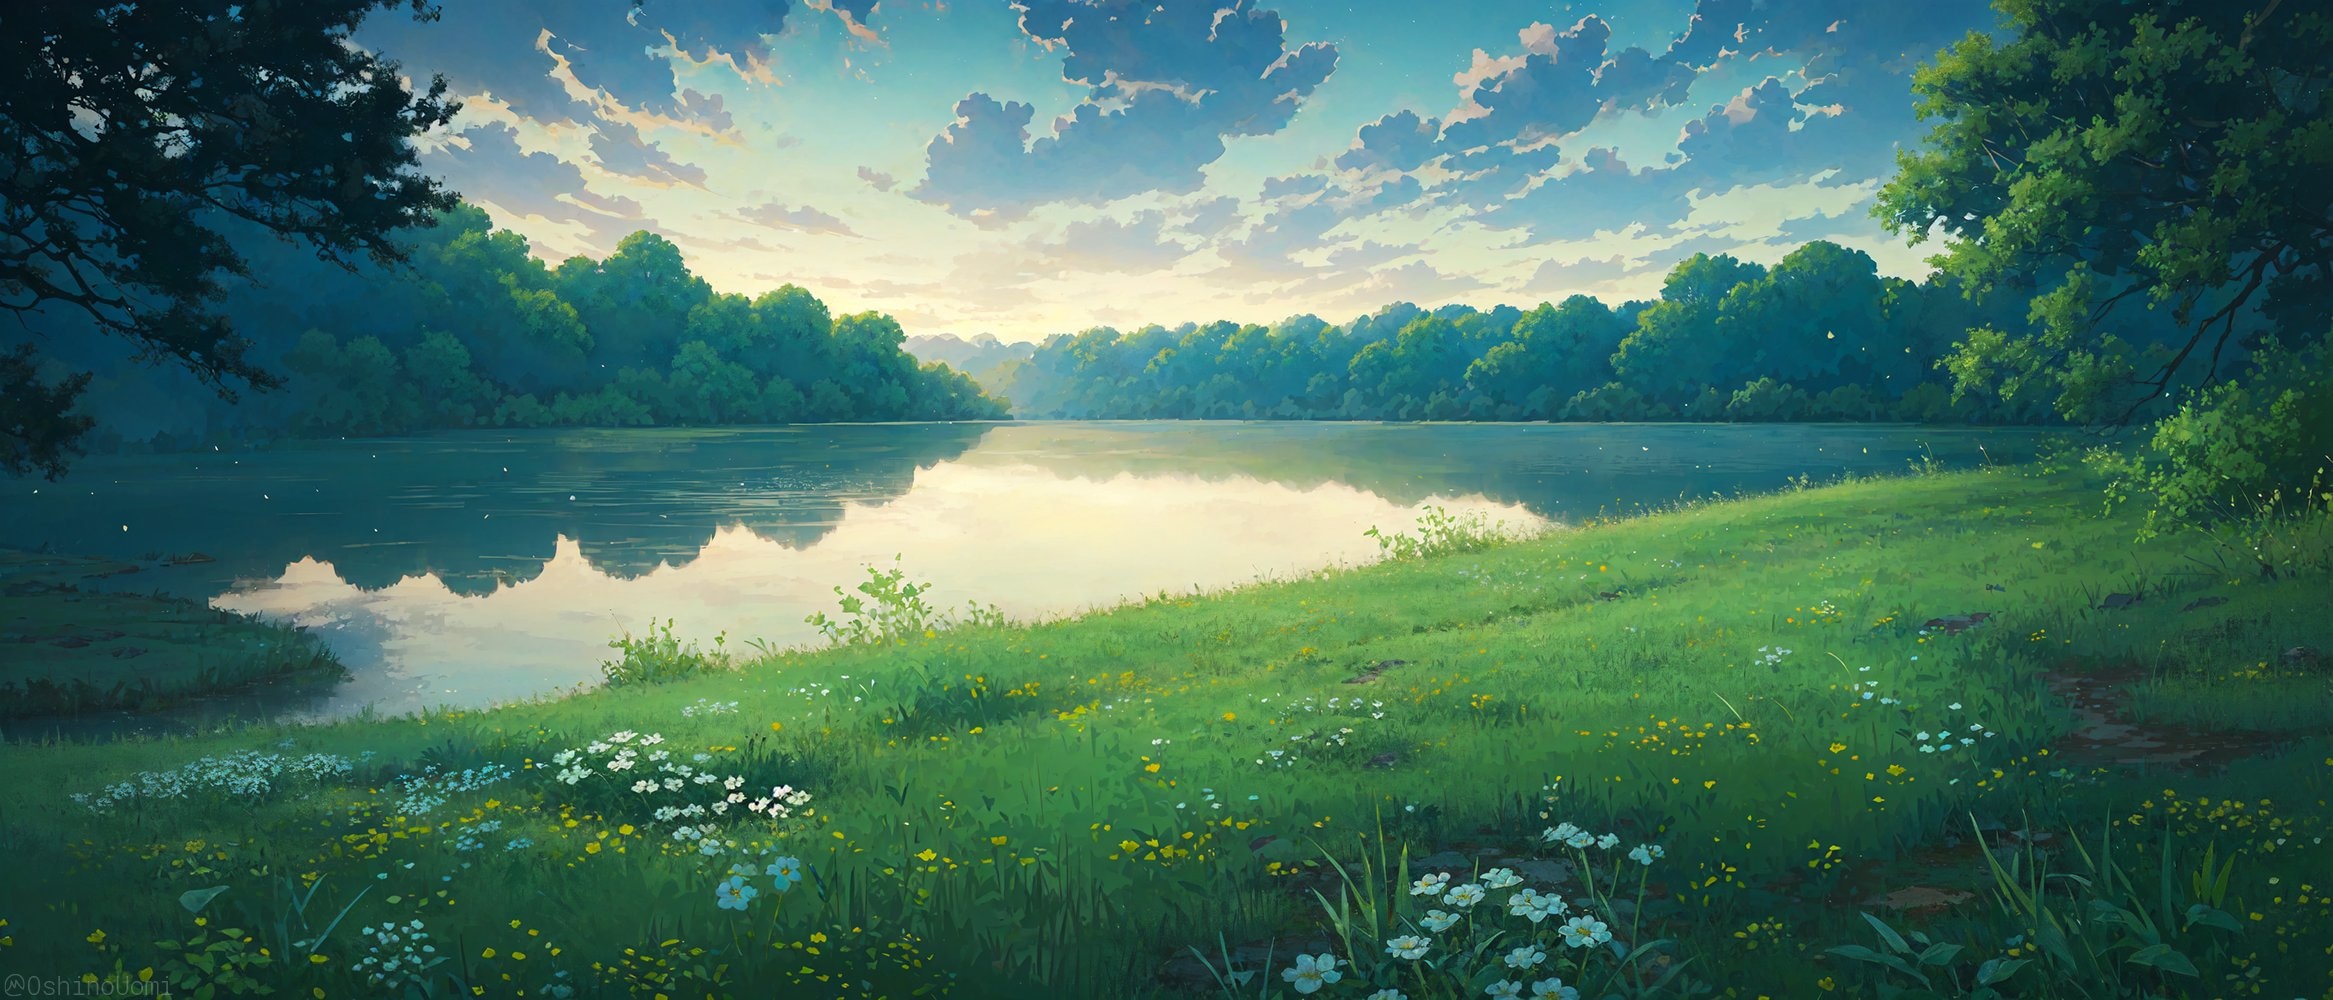 Anime 2333x1000 anime artwork nature landscape trees water lake sky clouds flowers grass